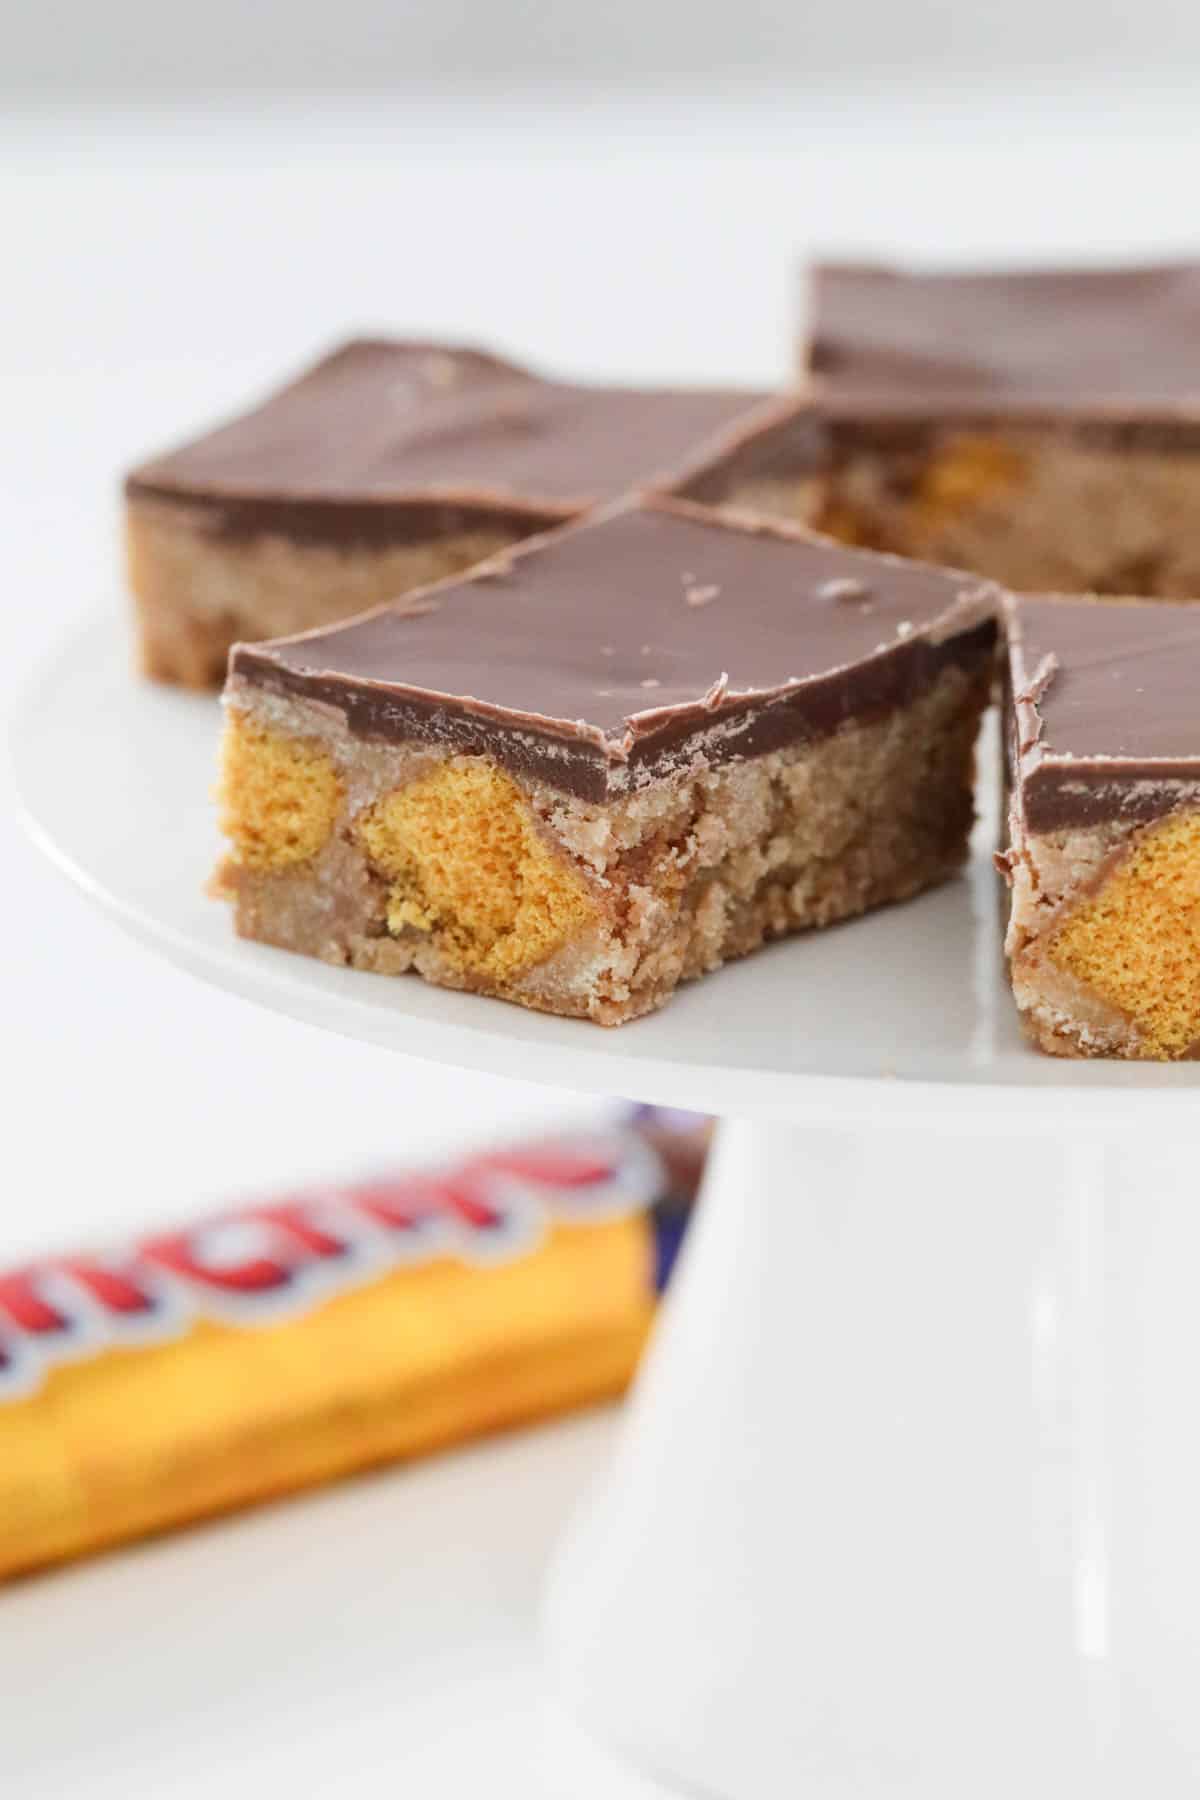 Honeycomb slice on a cake stand with a Crunchie bar behind.